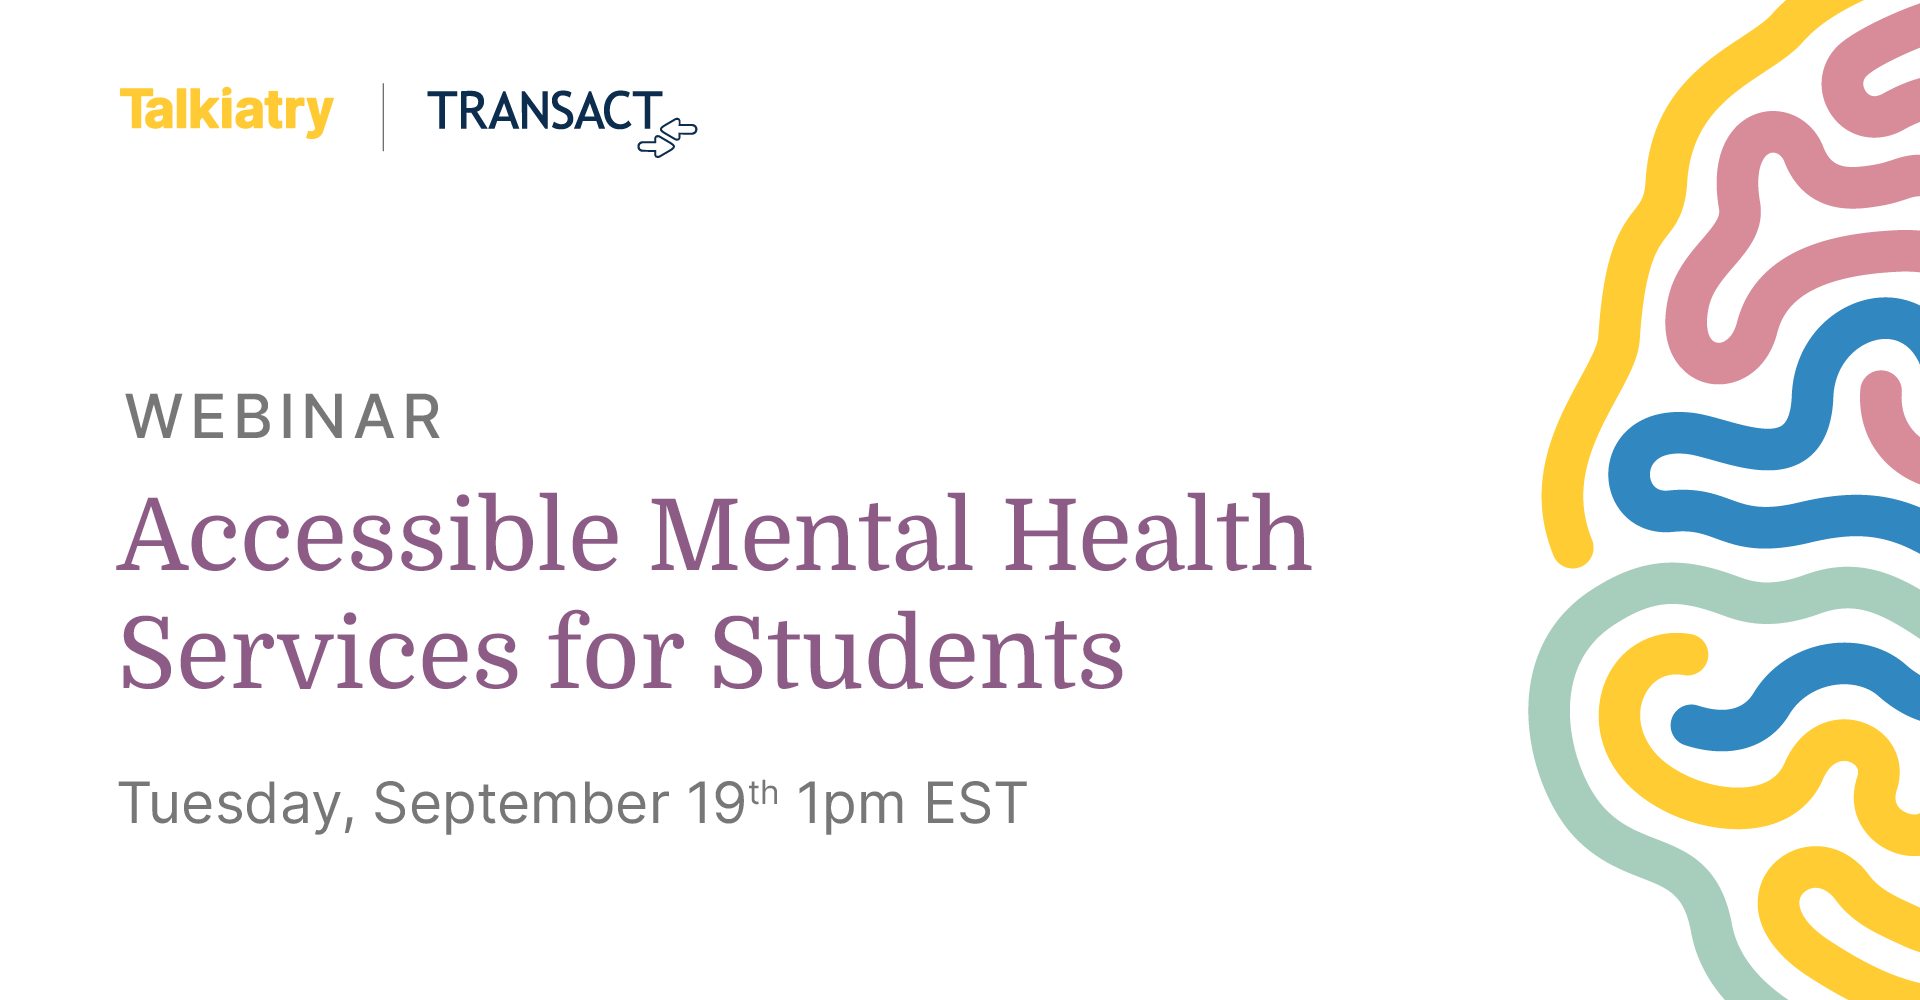 Accessible Mental Health Access for Students